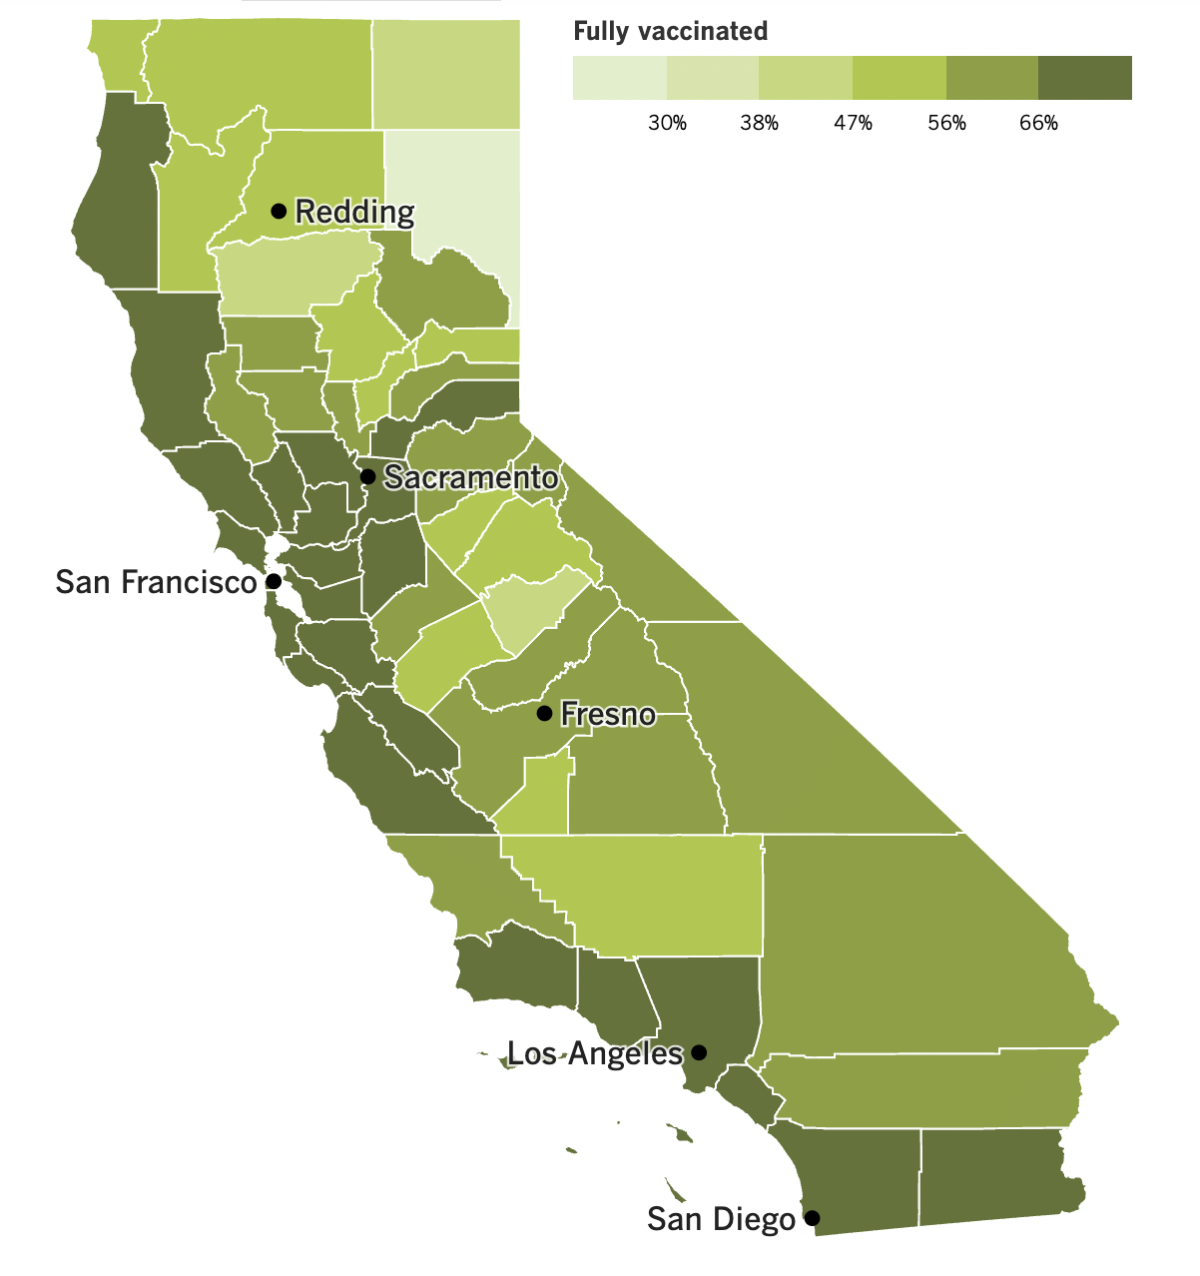 A map showing California's COVID-19 vaccination progress by county as of Oct. 18, 2022.